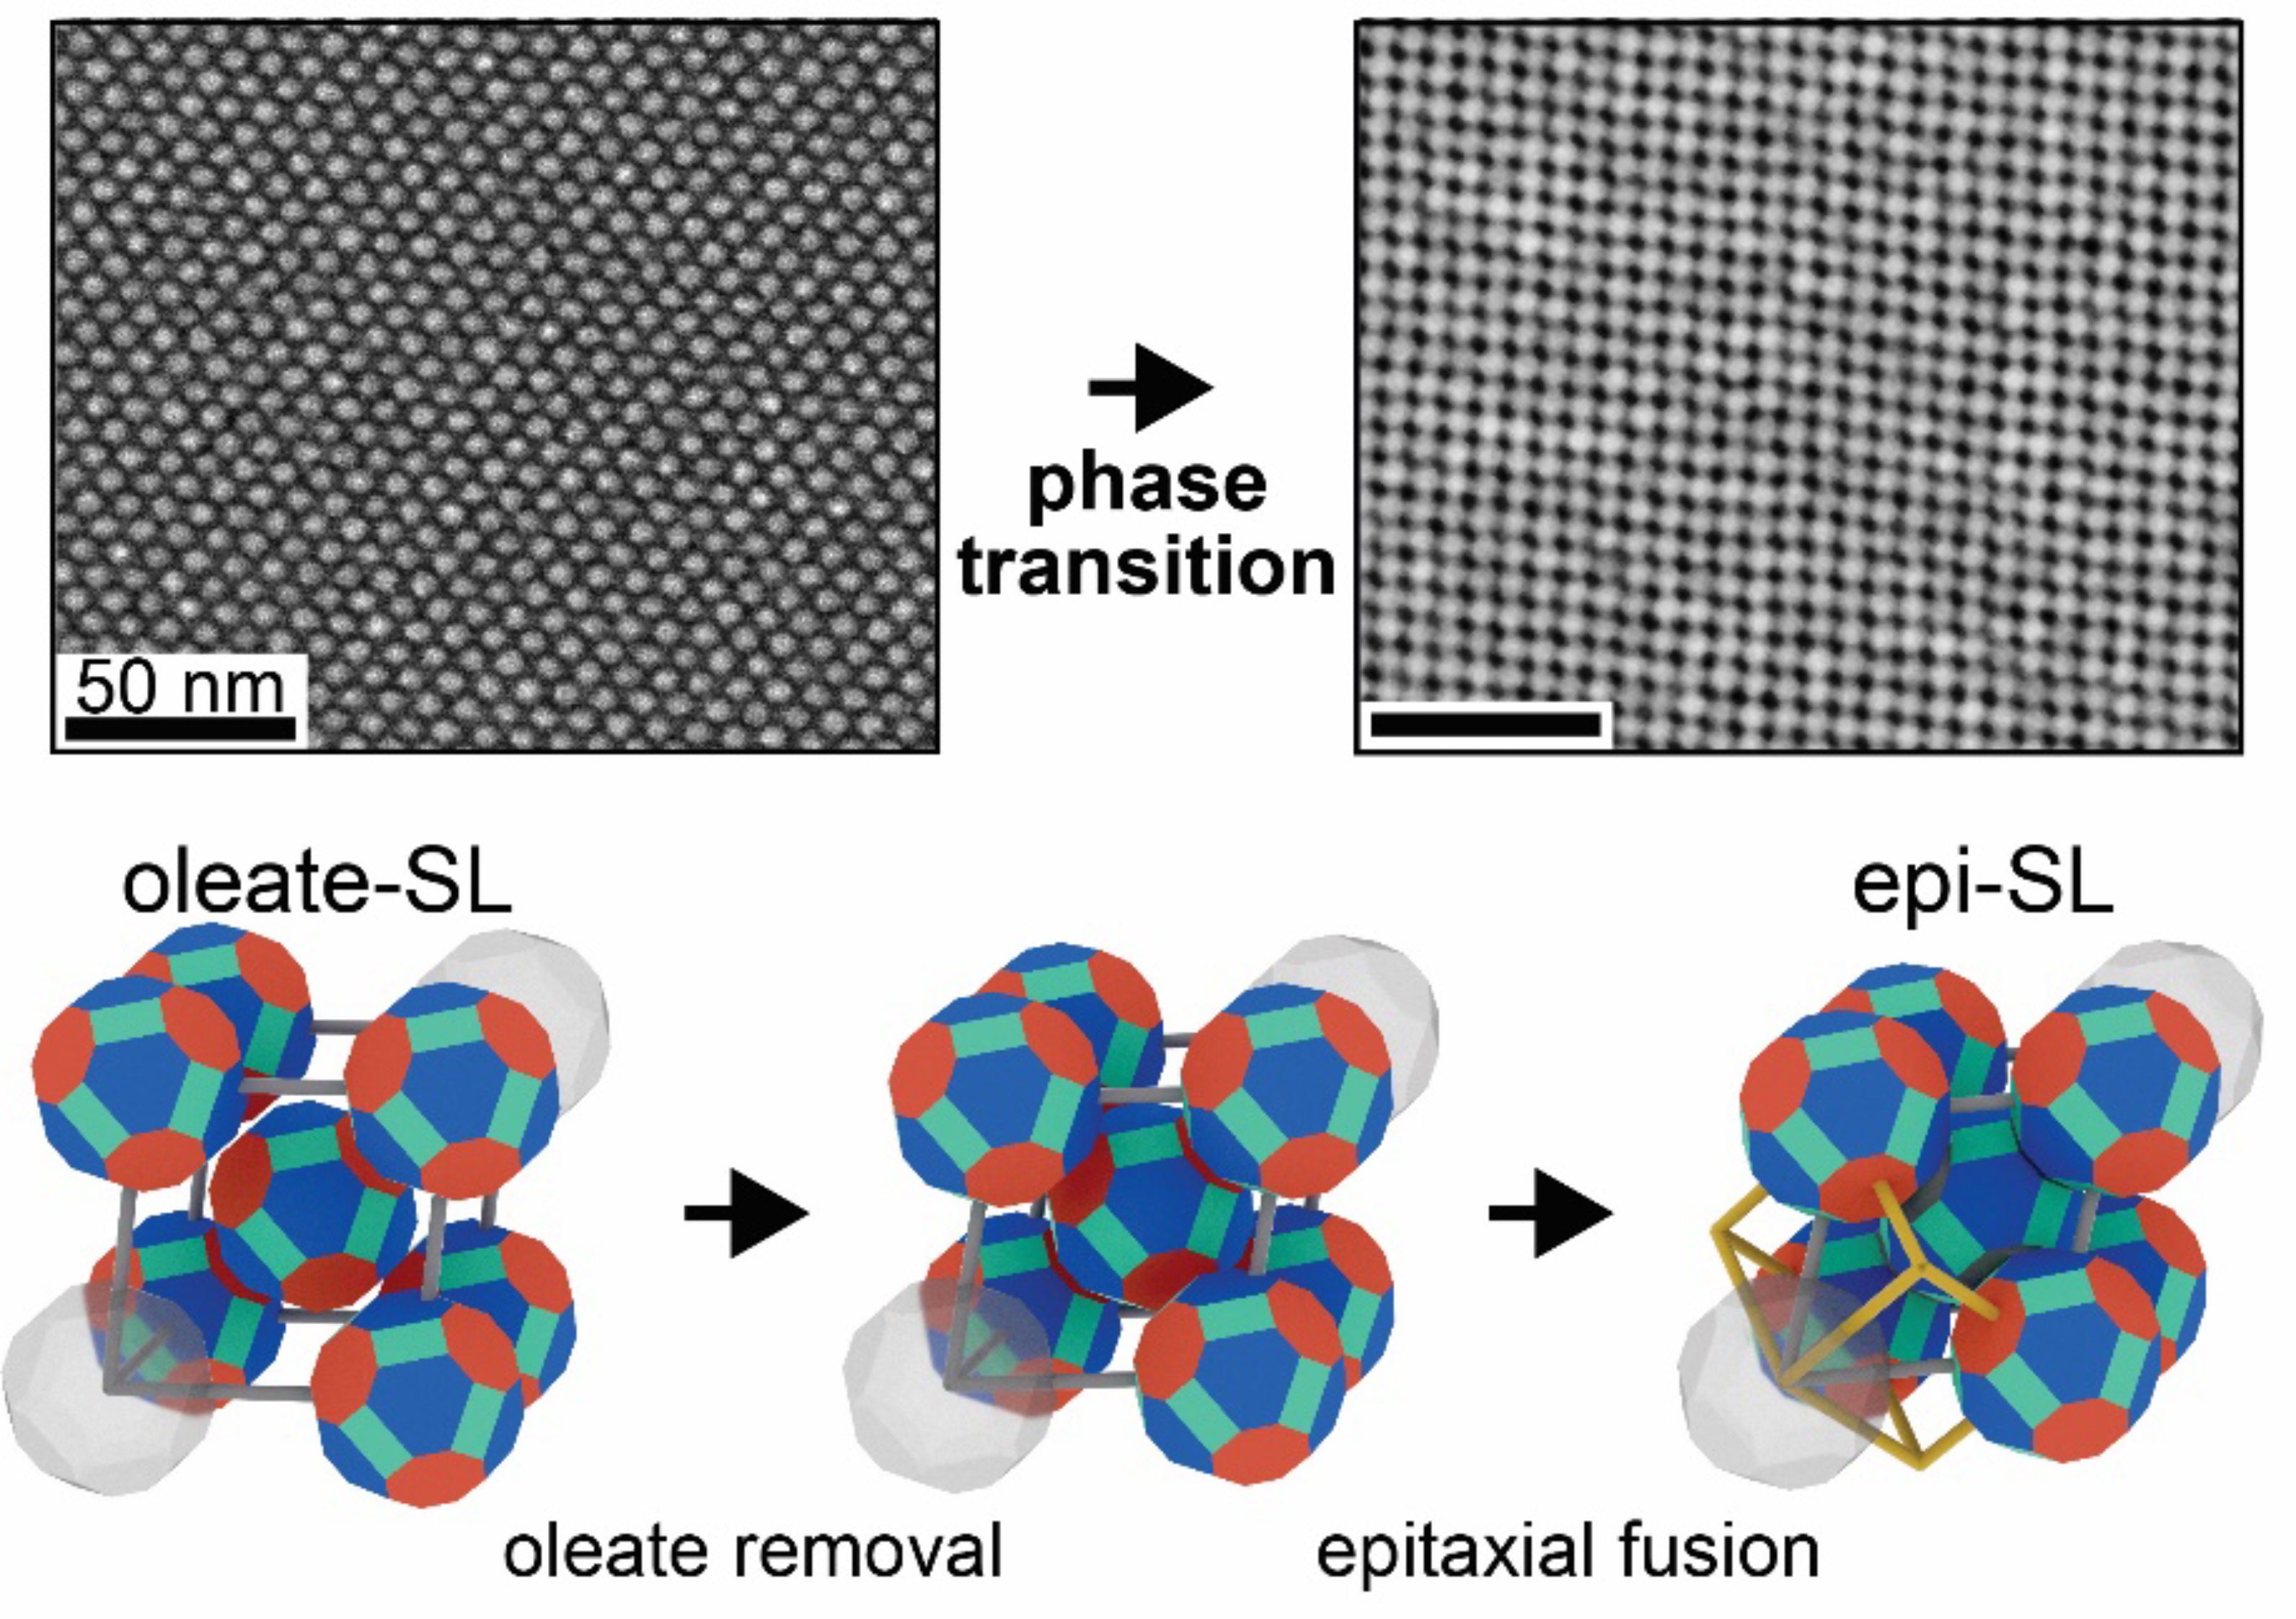 Top: Electron microscopy images before and after the transition. Bottom: Drawings depicting fusion of quantum dots.